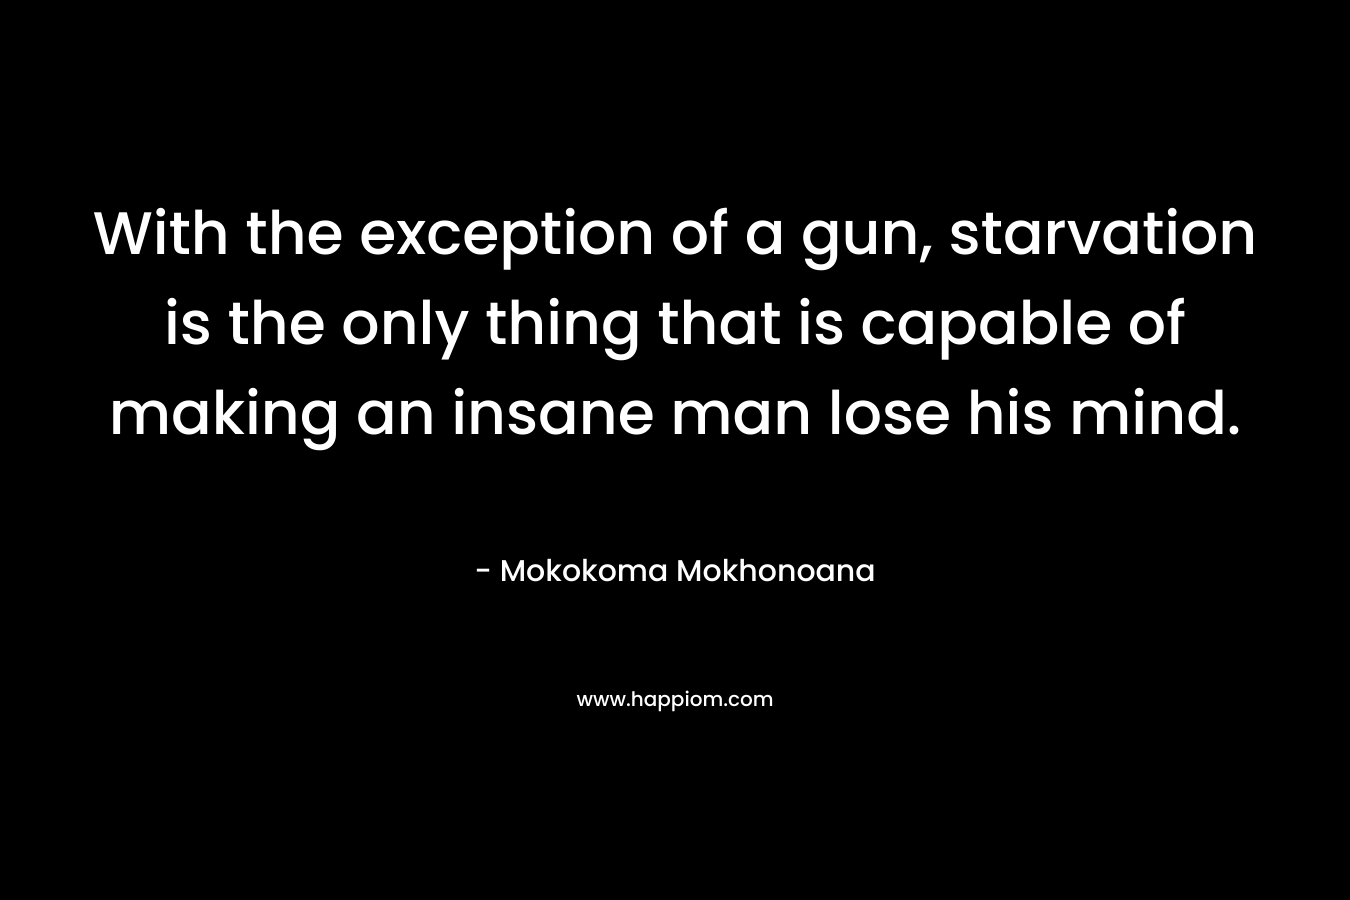 With the exception of a gun, starvation is the only thing that is capable of making an insane man lose his mind.